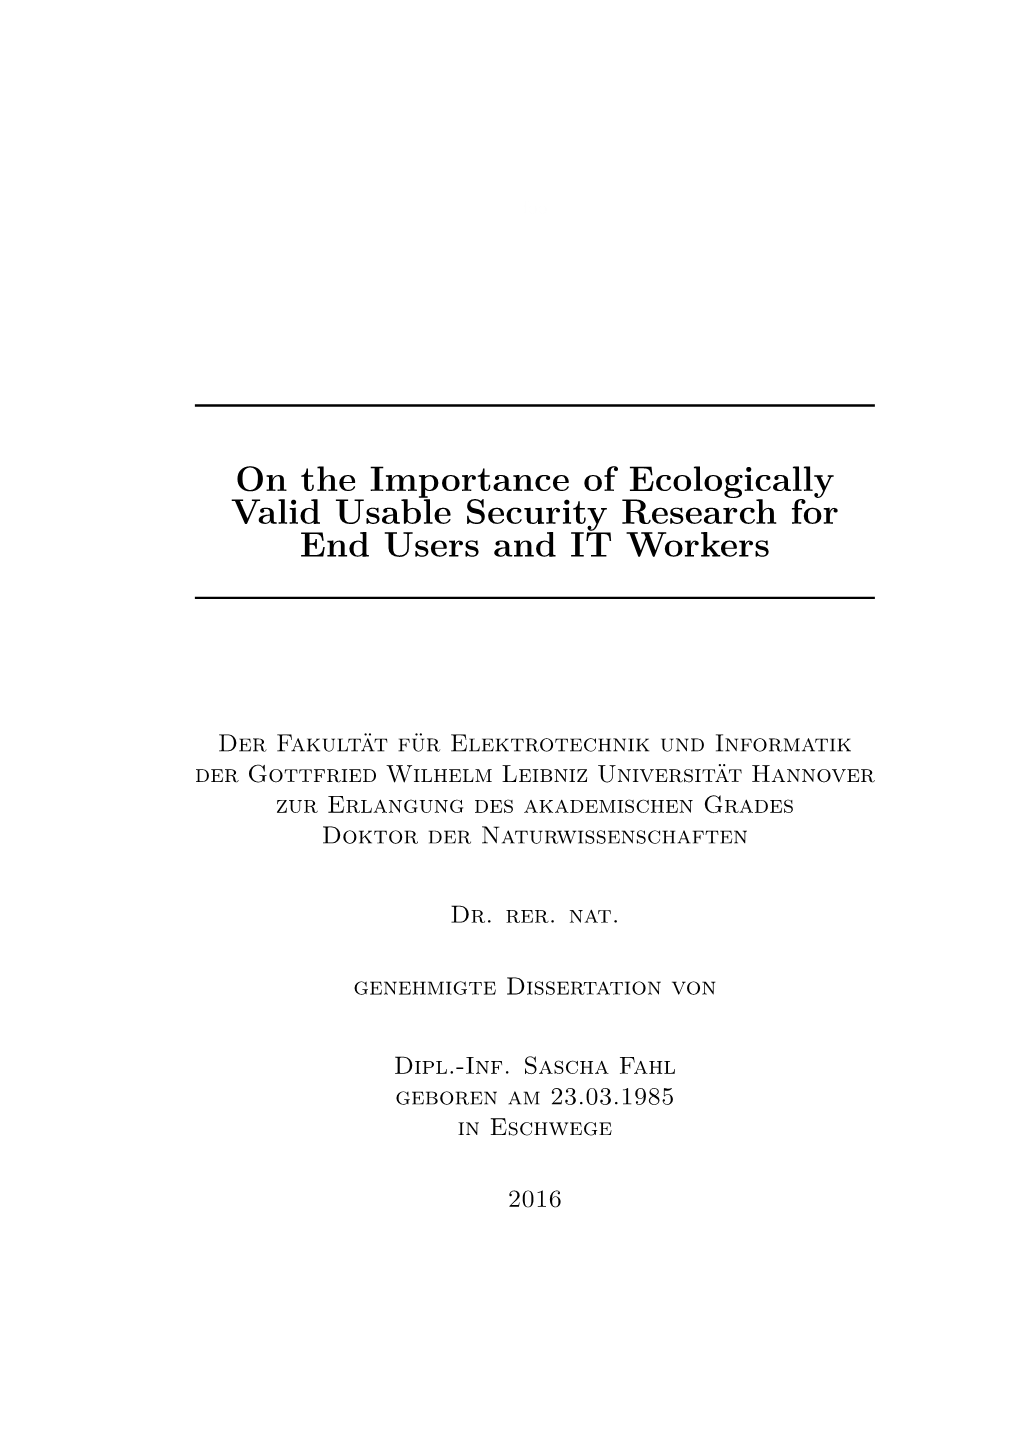 On the Importance of Ecologically Valid Usable Security Research for End Users and IT Workers